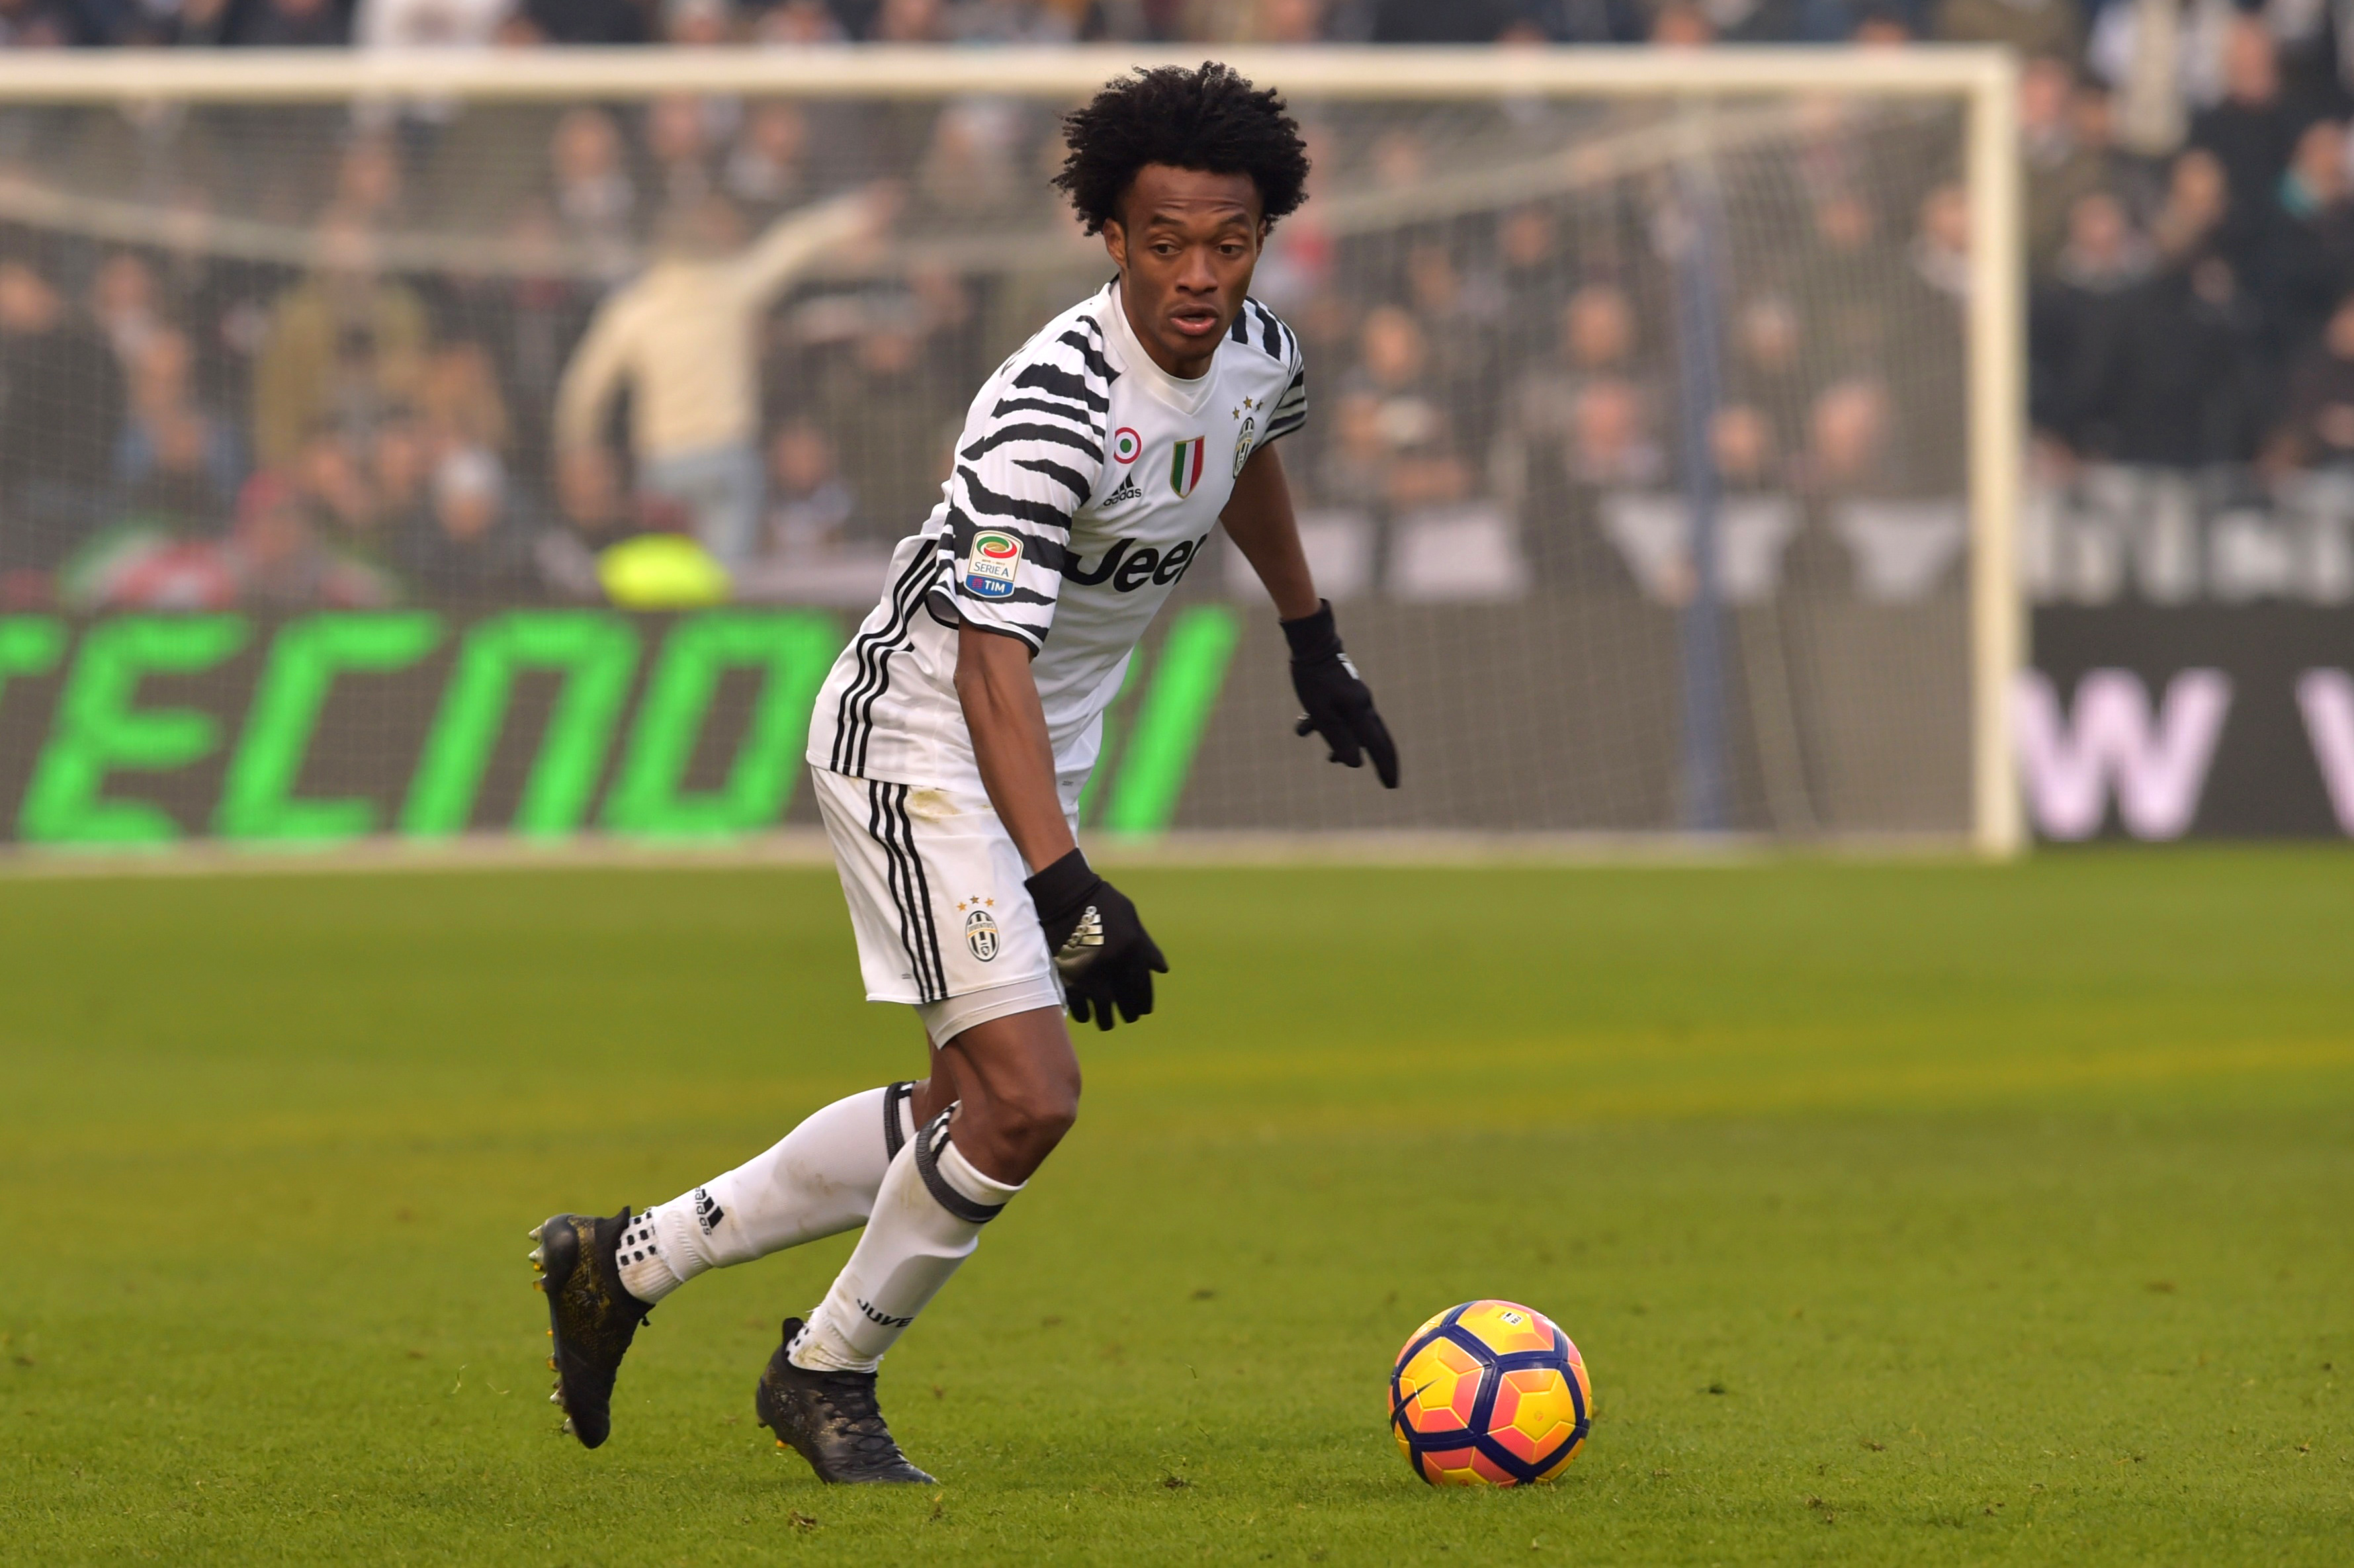 CdS – Inter could make Cuadrado move if they miss out on Keita